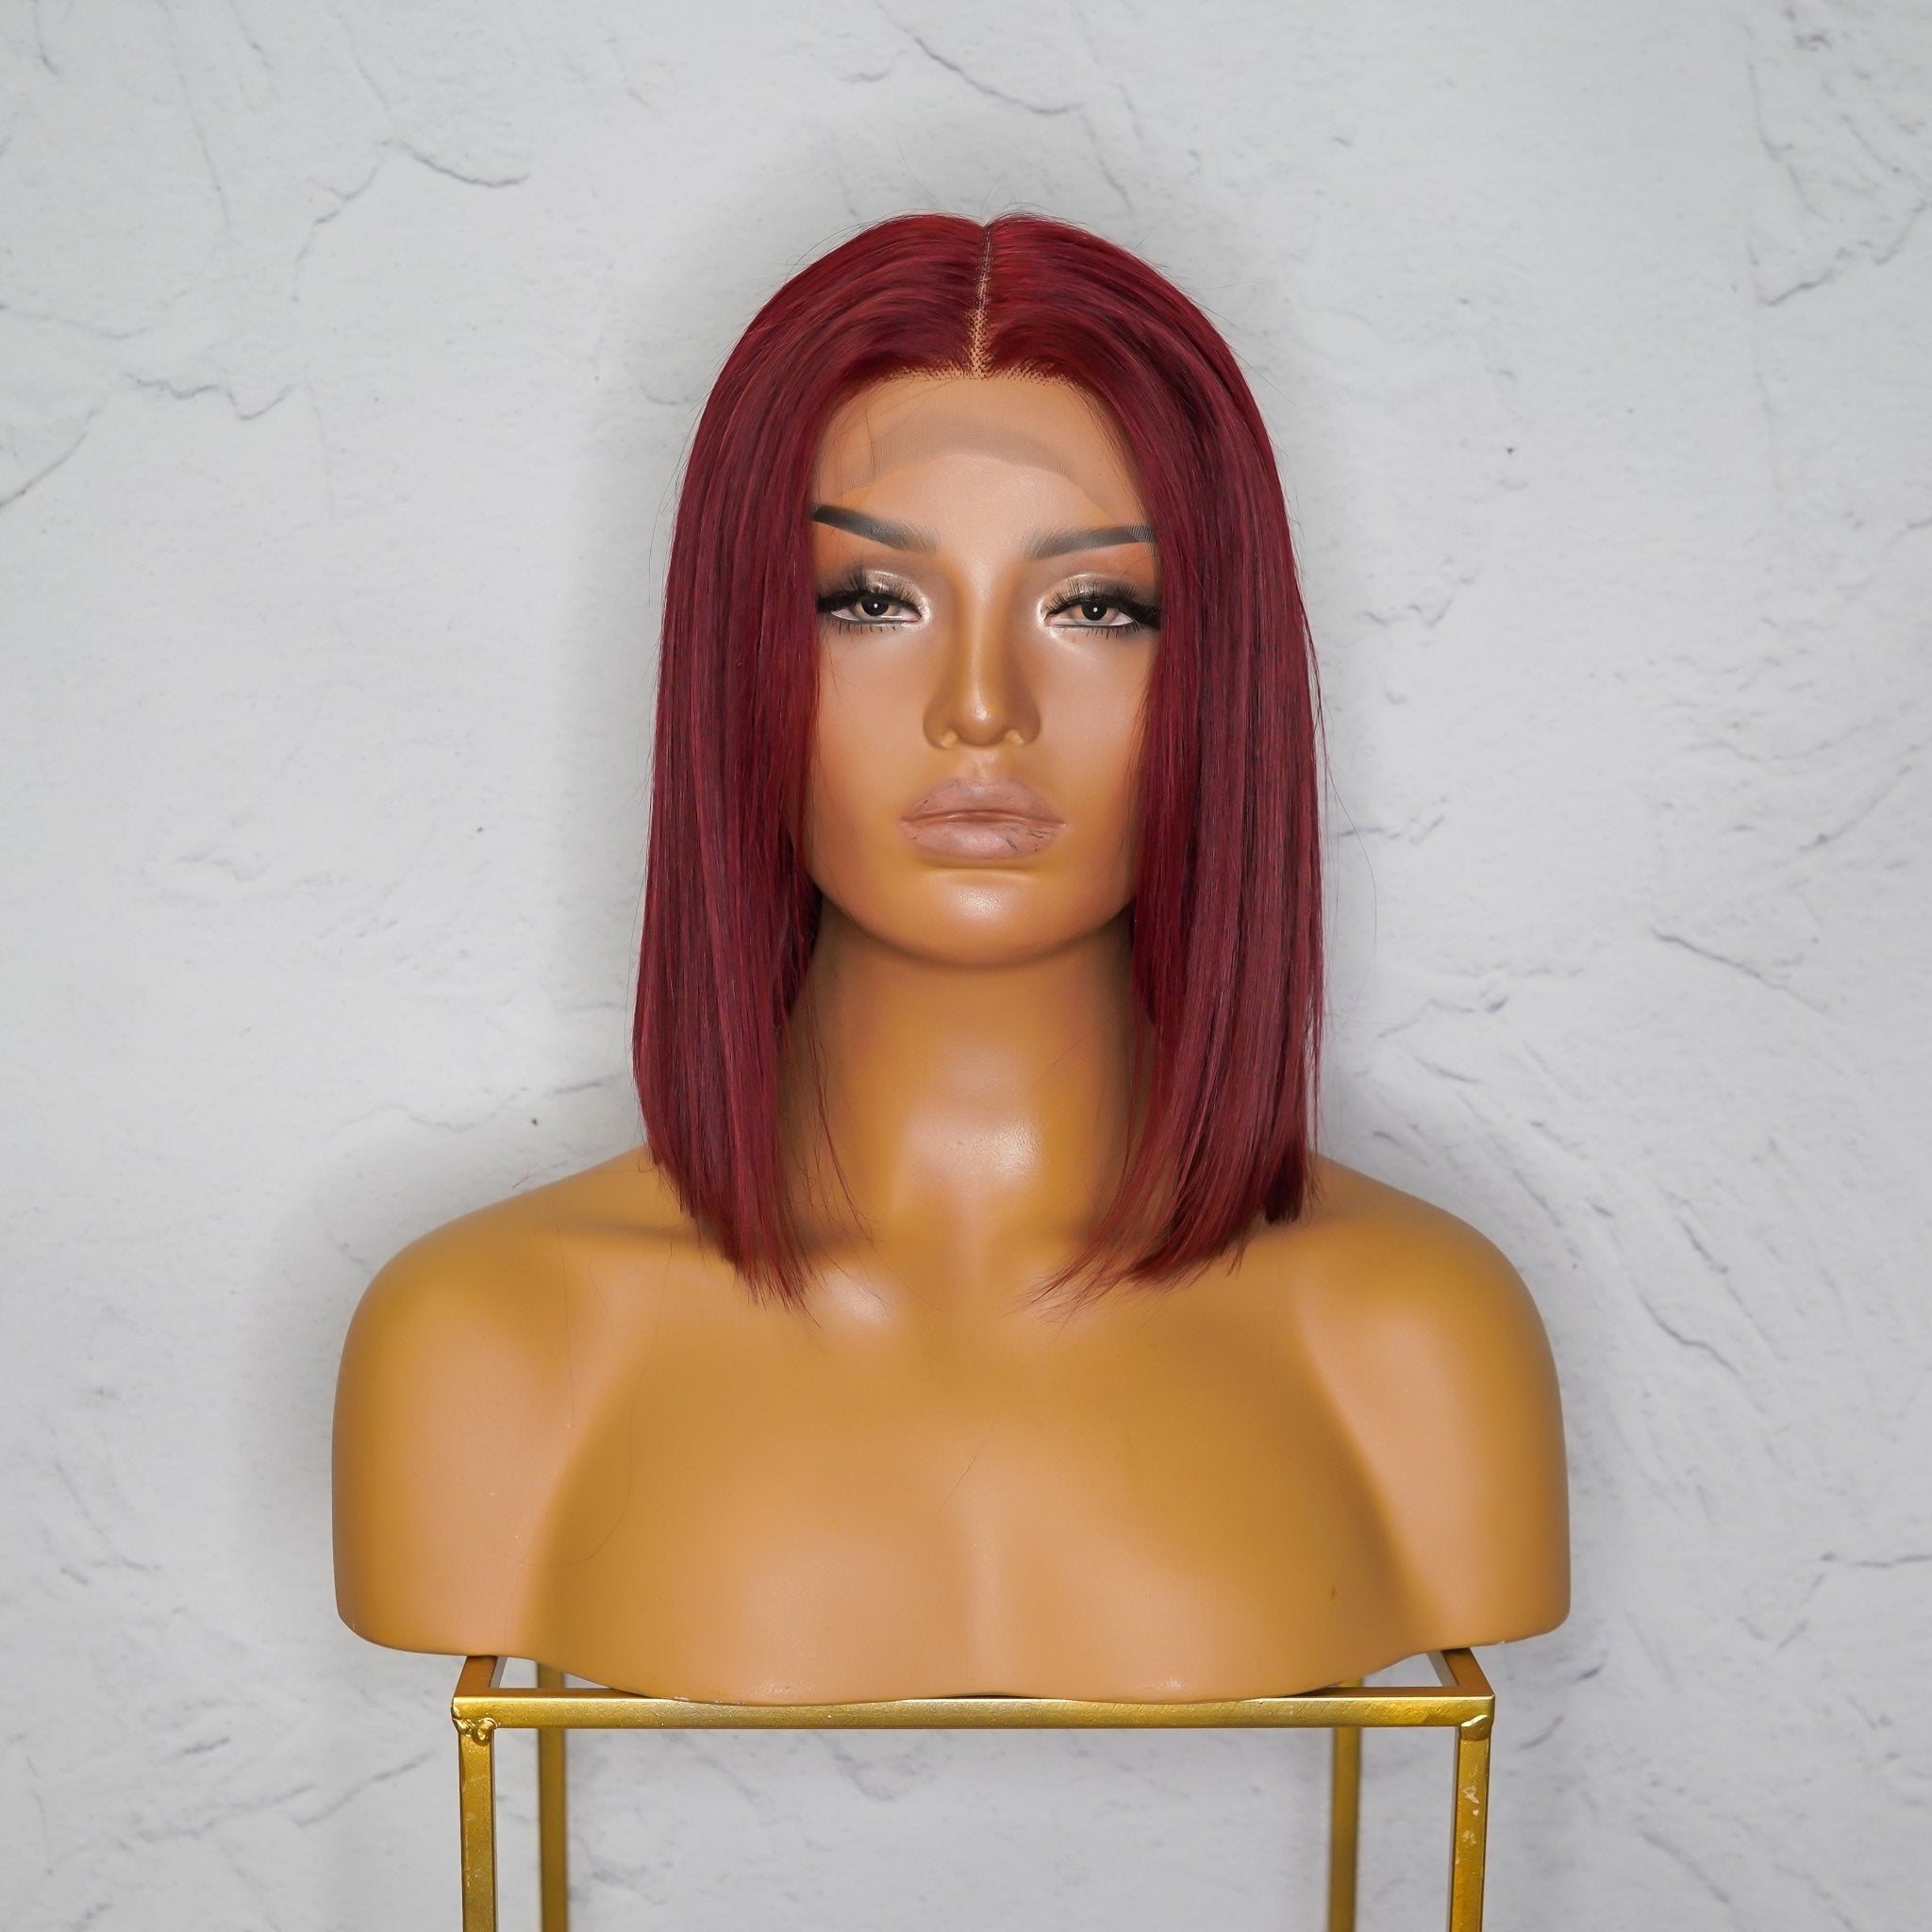 SPICE Human Hair Lace Front Wig ** READY TO SHIP ** - Milk & Honey